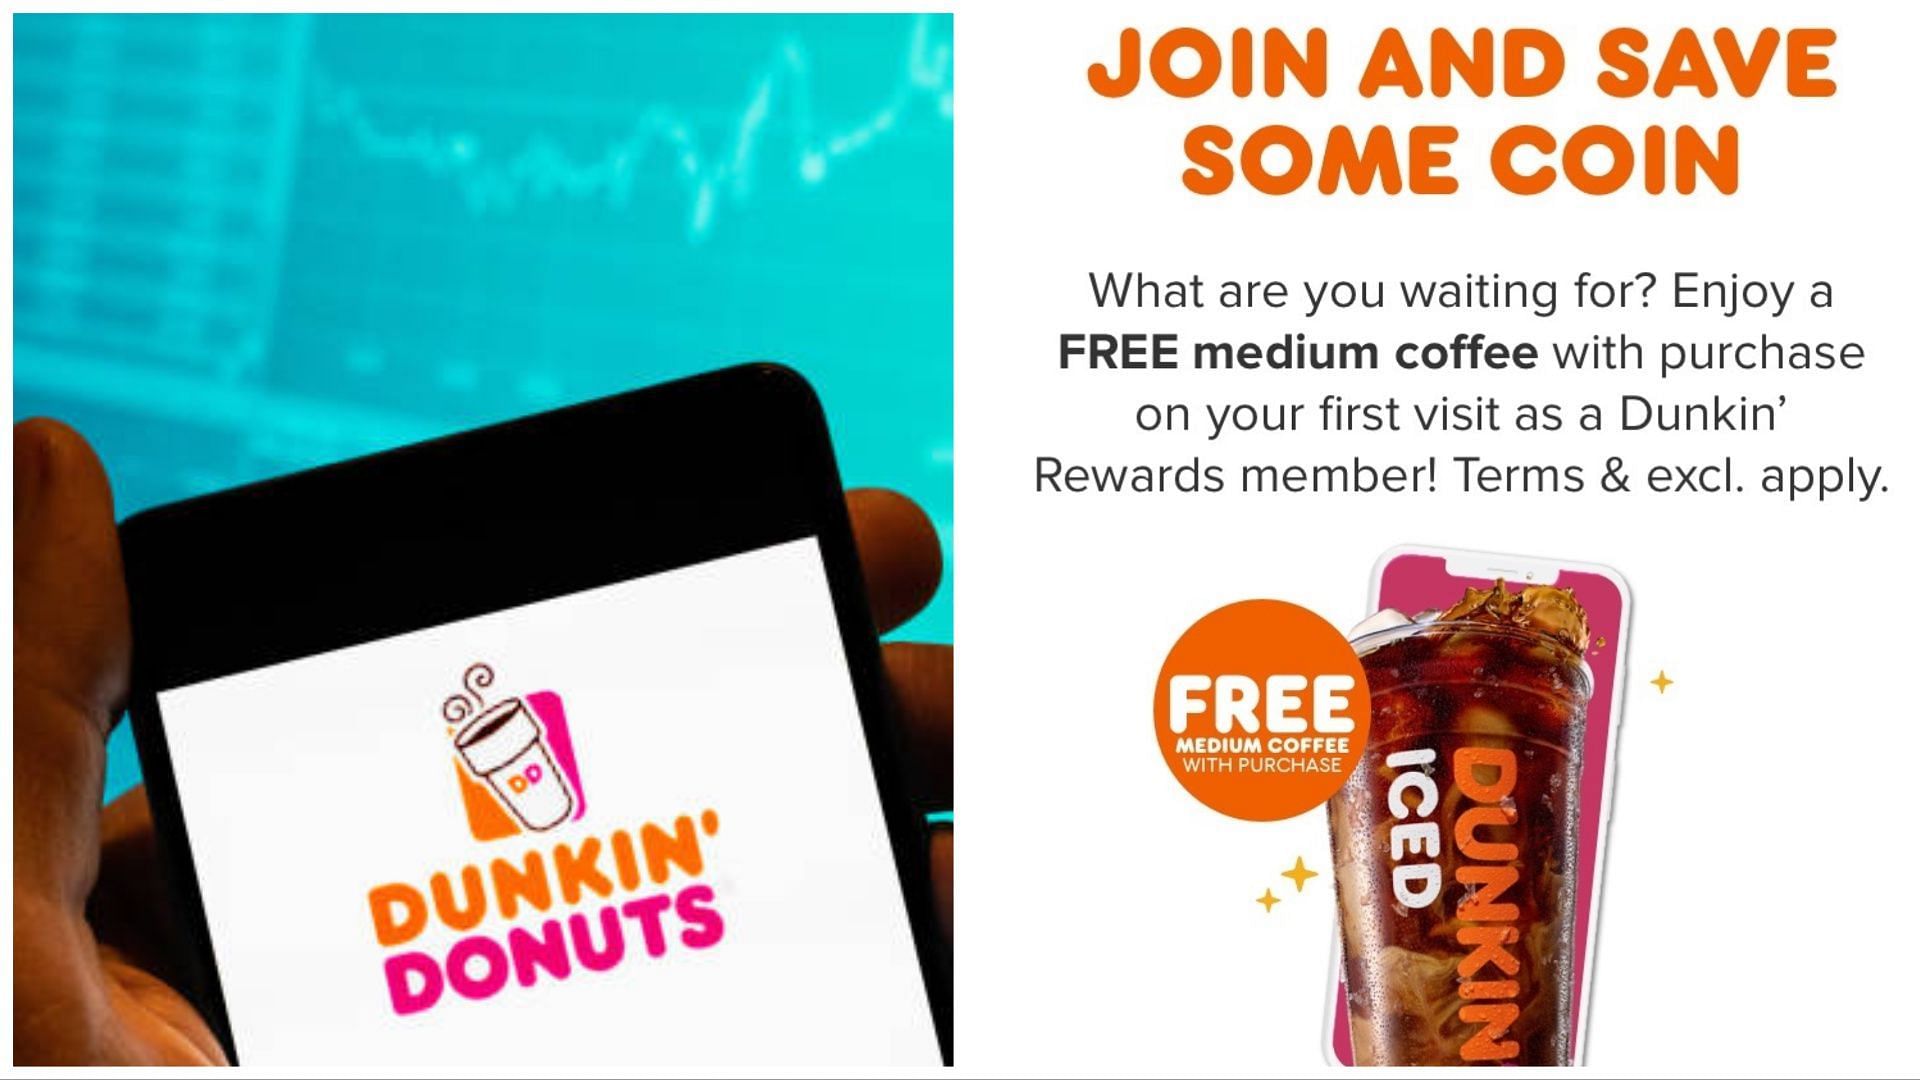 The offer is valid only till the last day of August (Image via Getty Images / Dunkin)